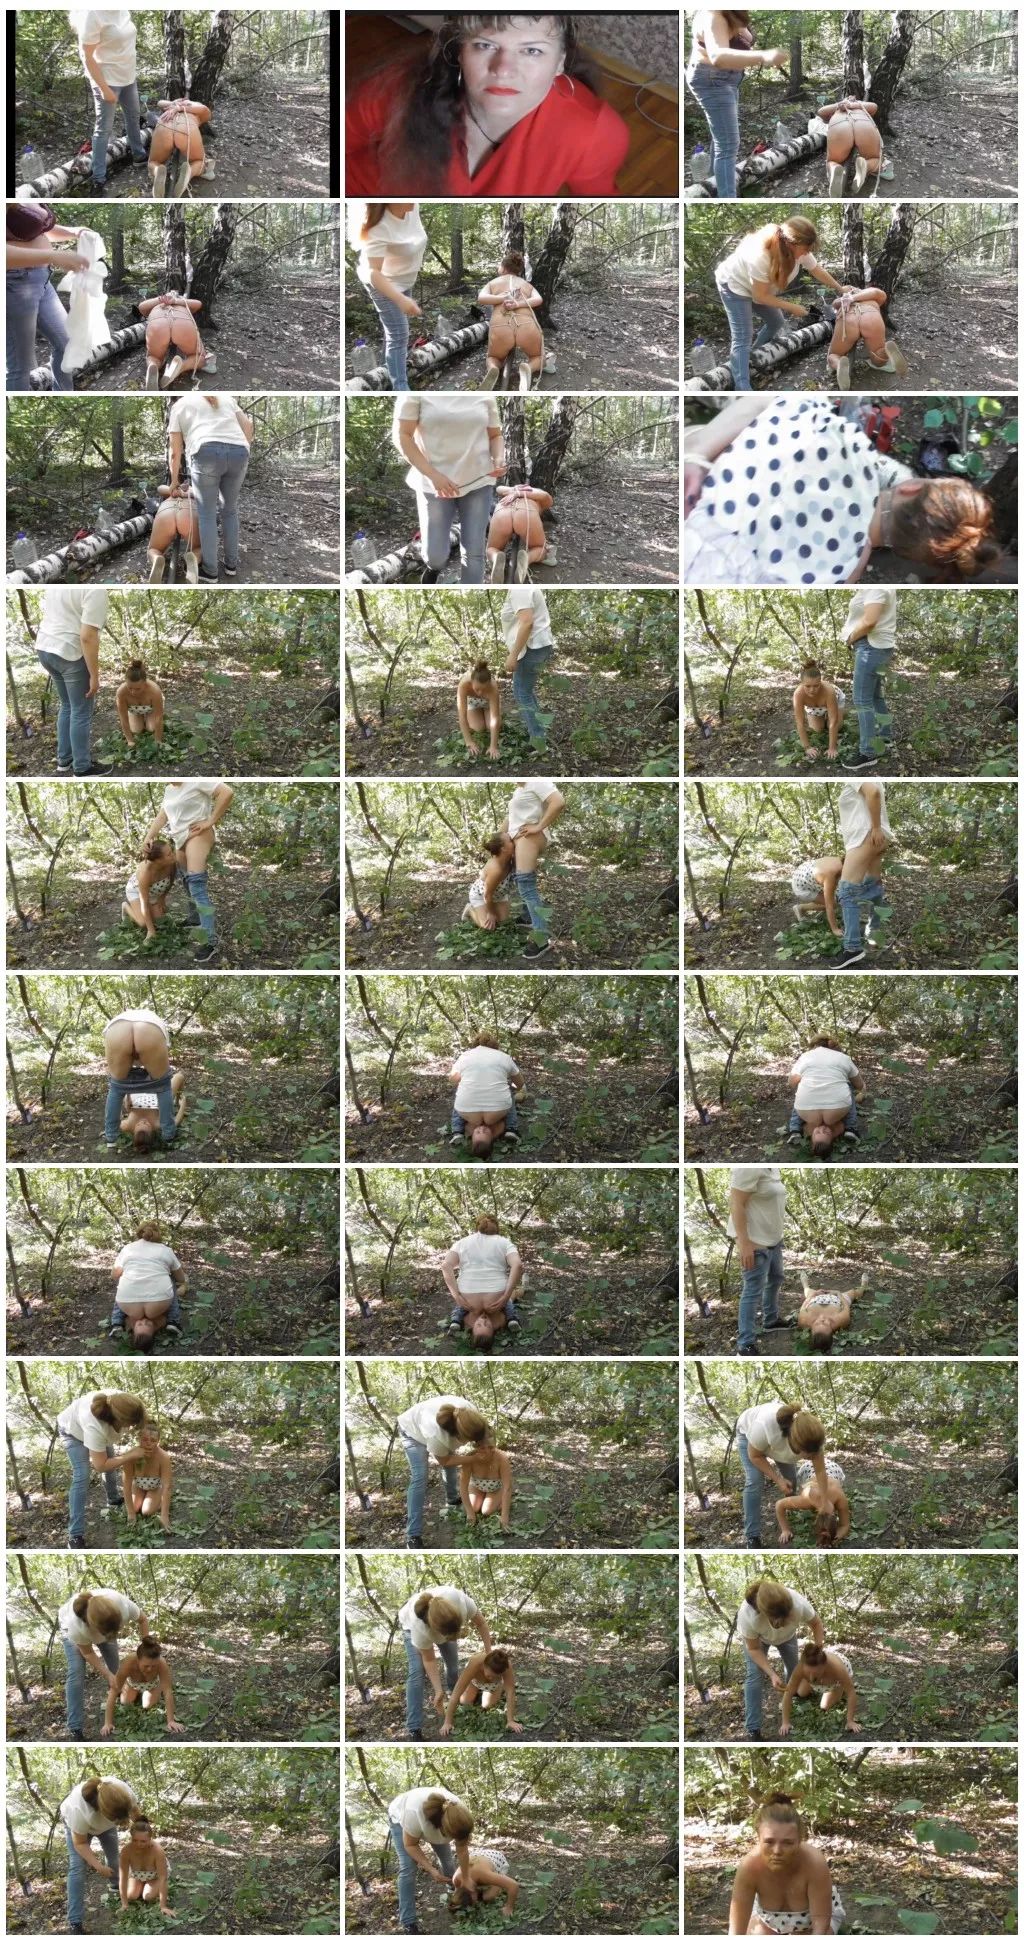 Shitting in mouth slavegirl in woods [Scat Lesbians,Toilet Slavery, Domination, Eat shit ,Licking,Humiliations]